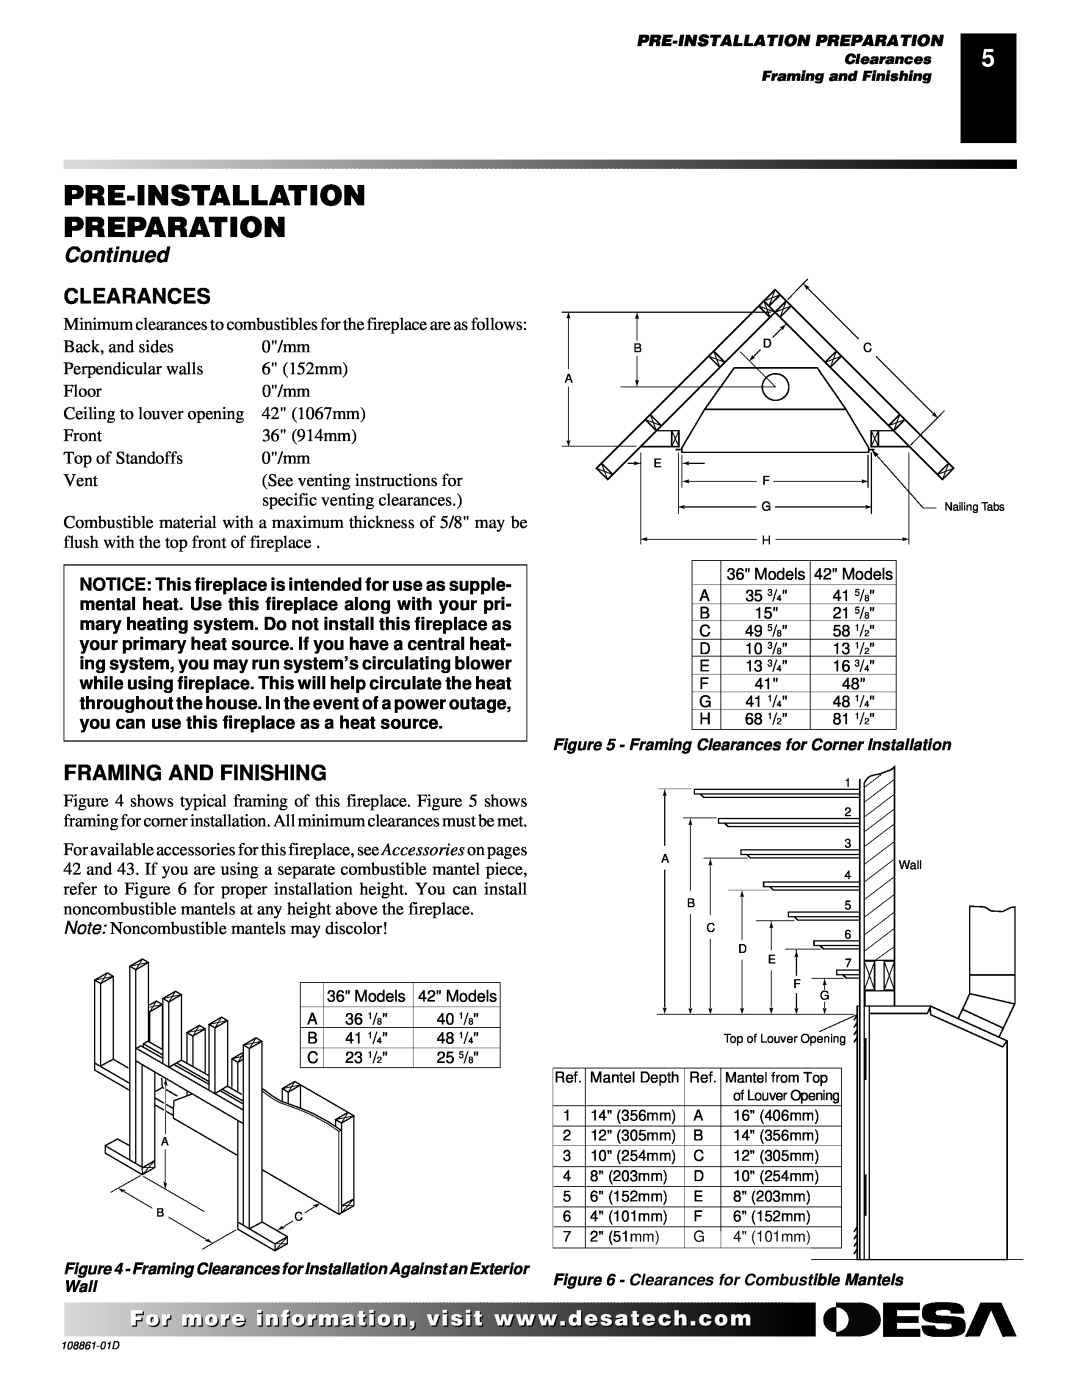 Desa (V)V42P, (V)V42N, (V)V36P, CHDV36NR, CHDV42NR Clearances, Framing And Finishing, Pre-Installation Preparation, Continued 